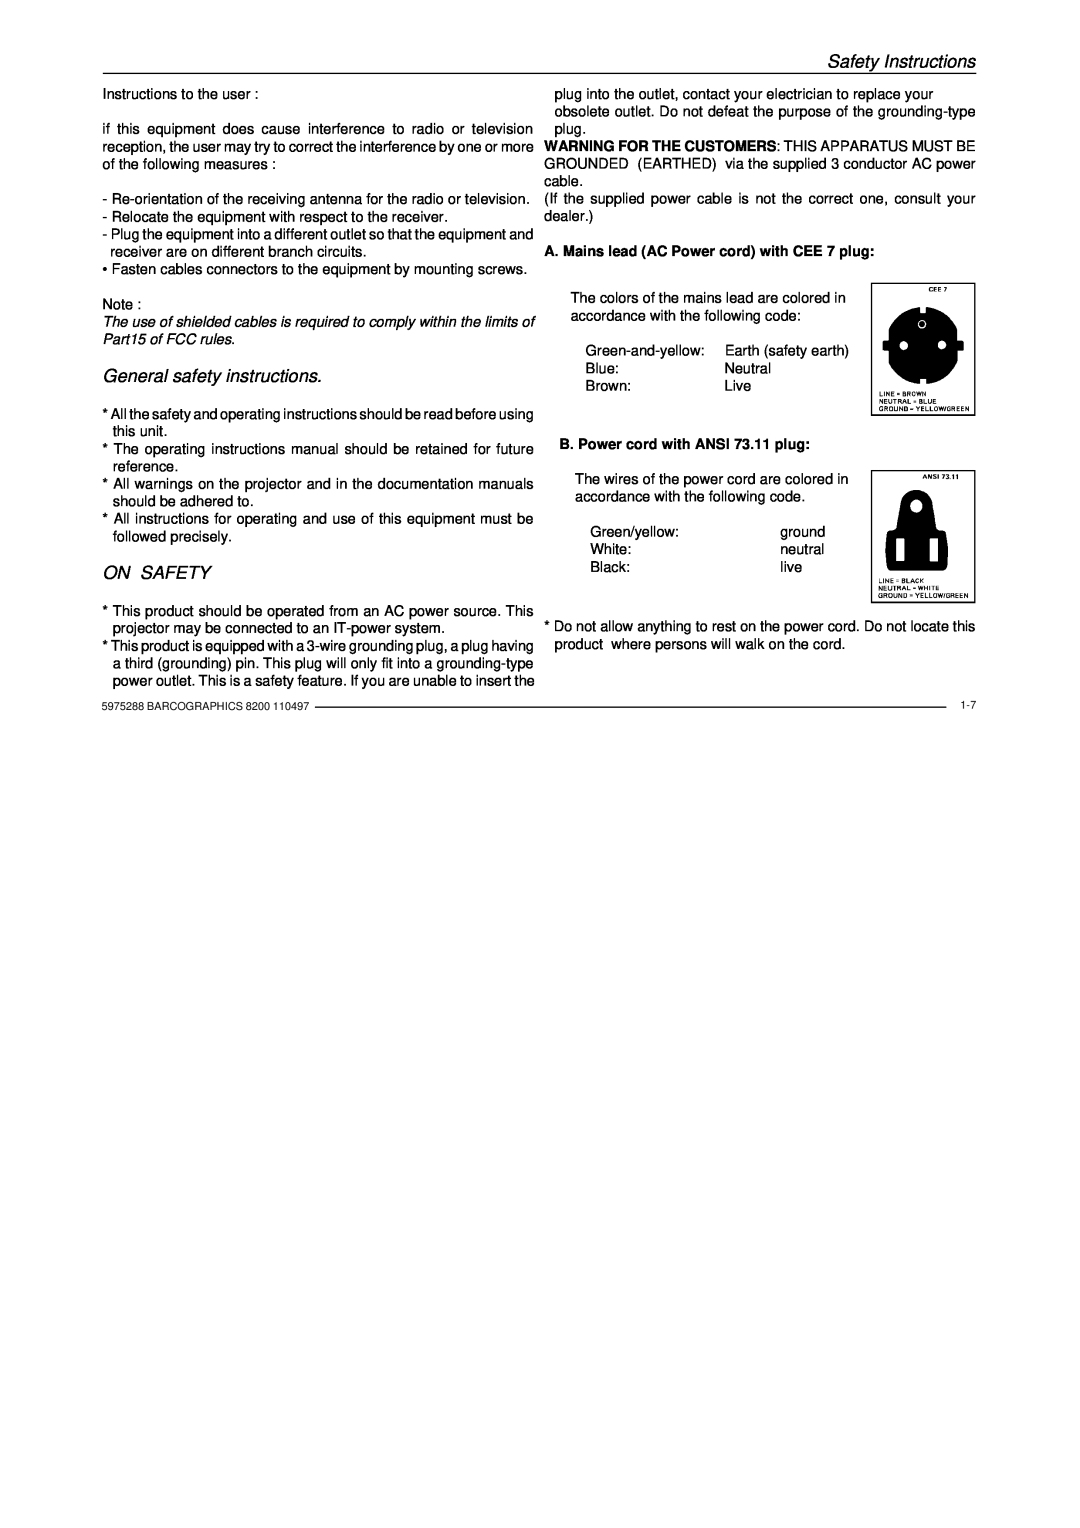 Barco R9001330 General safety instructions, On Safety, A. Mains lead AC Power cord with CEE 7 plug, Safety Instructions 